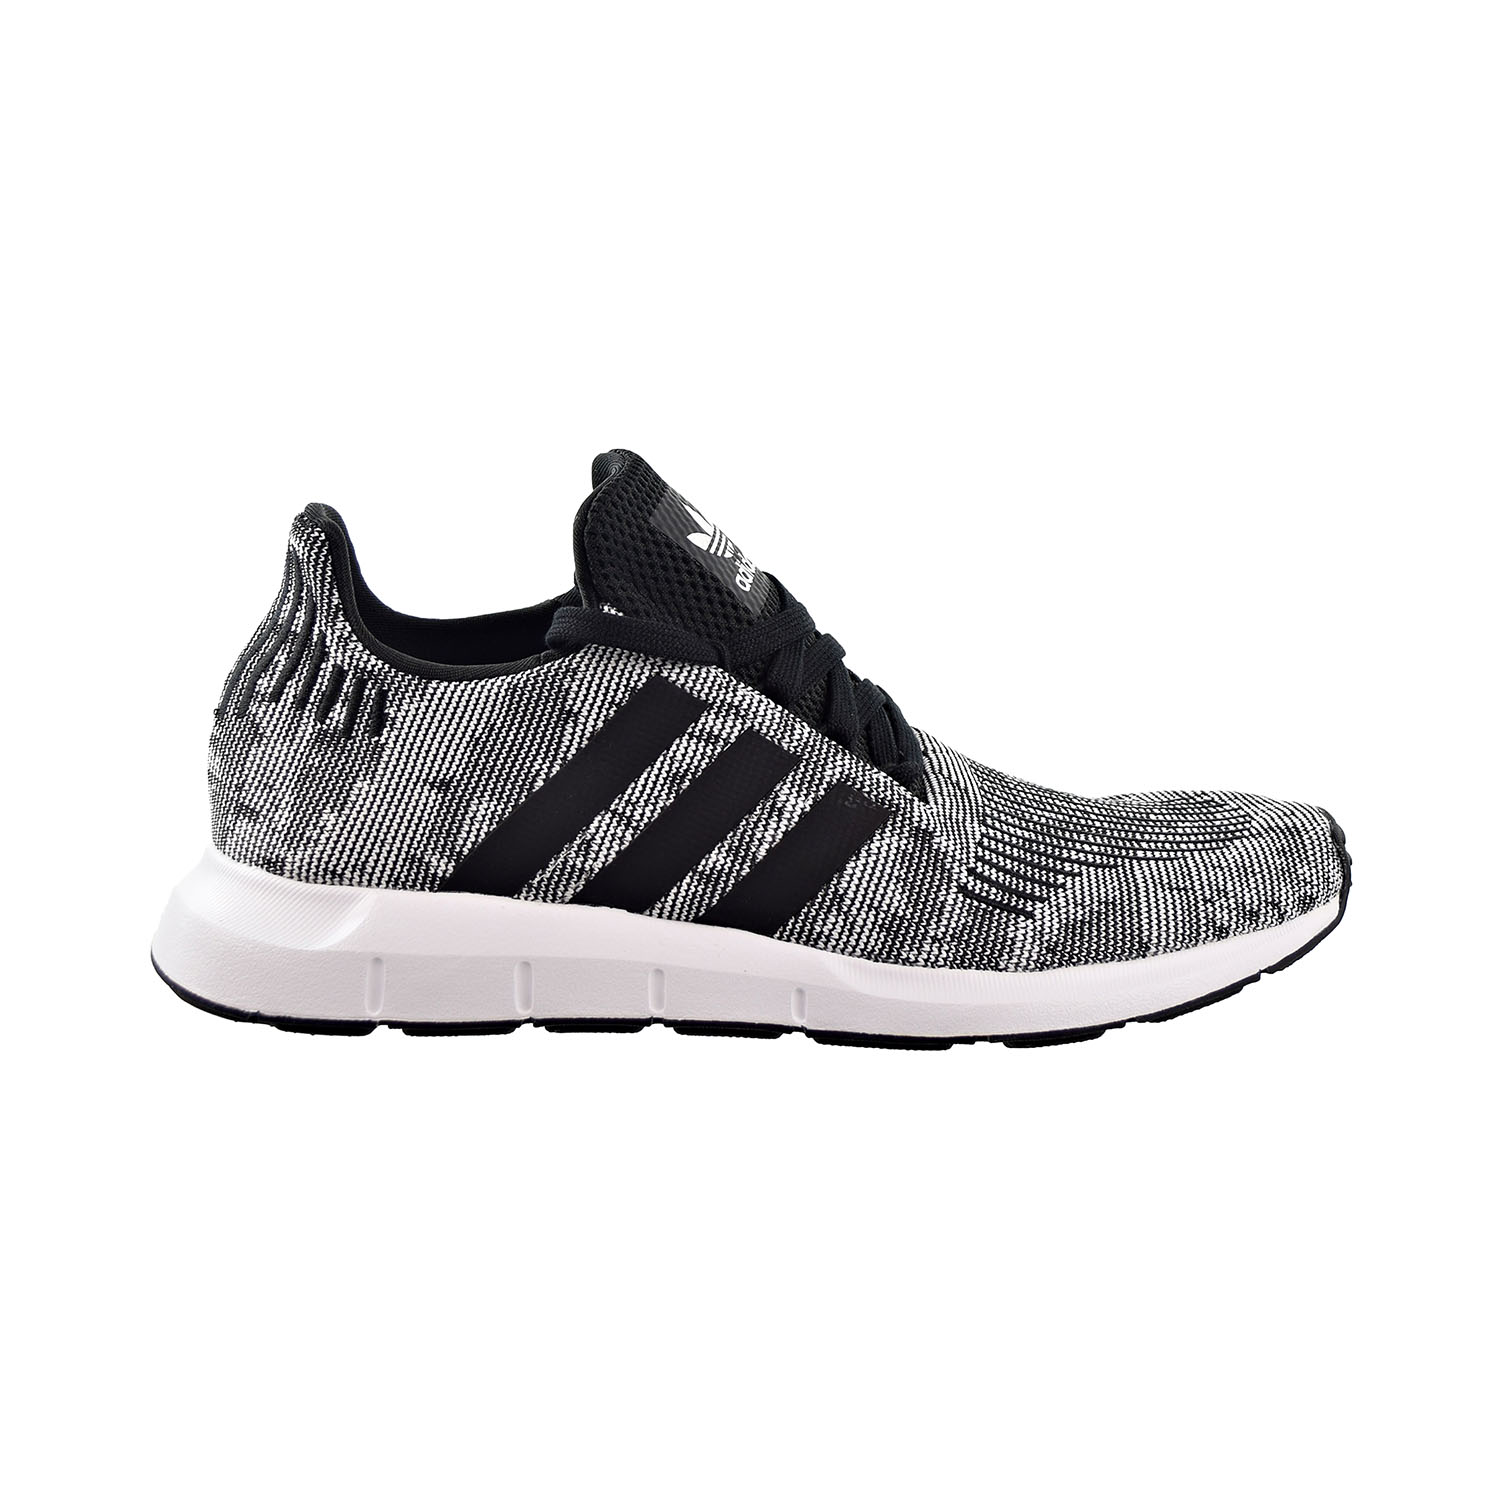 white and black adidas running shoes